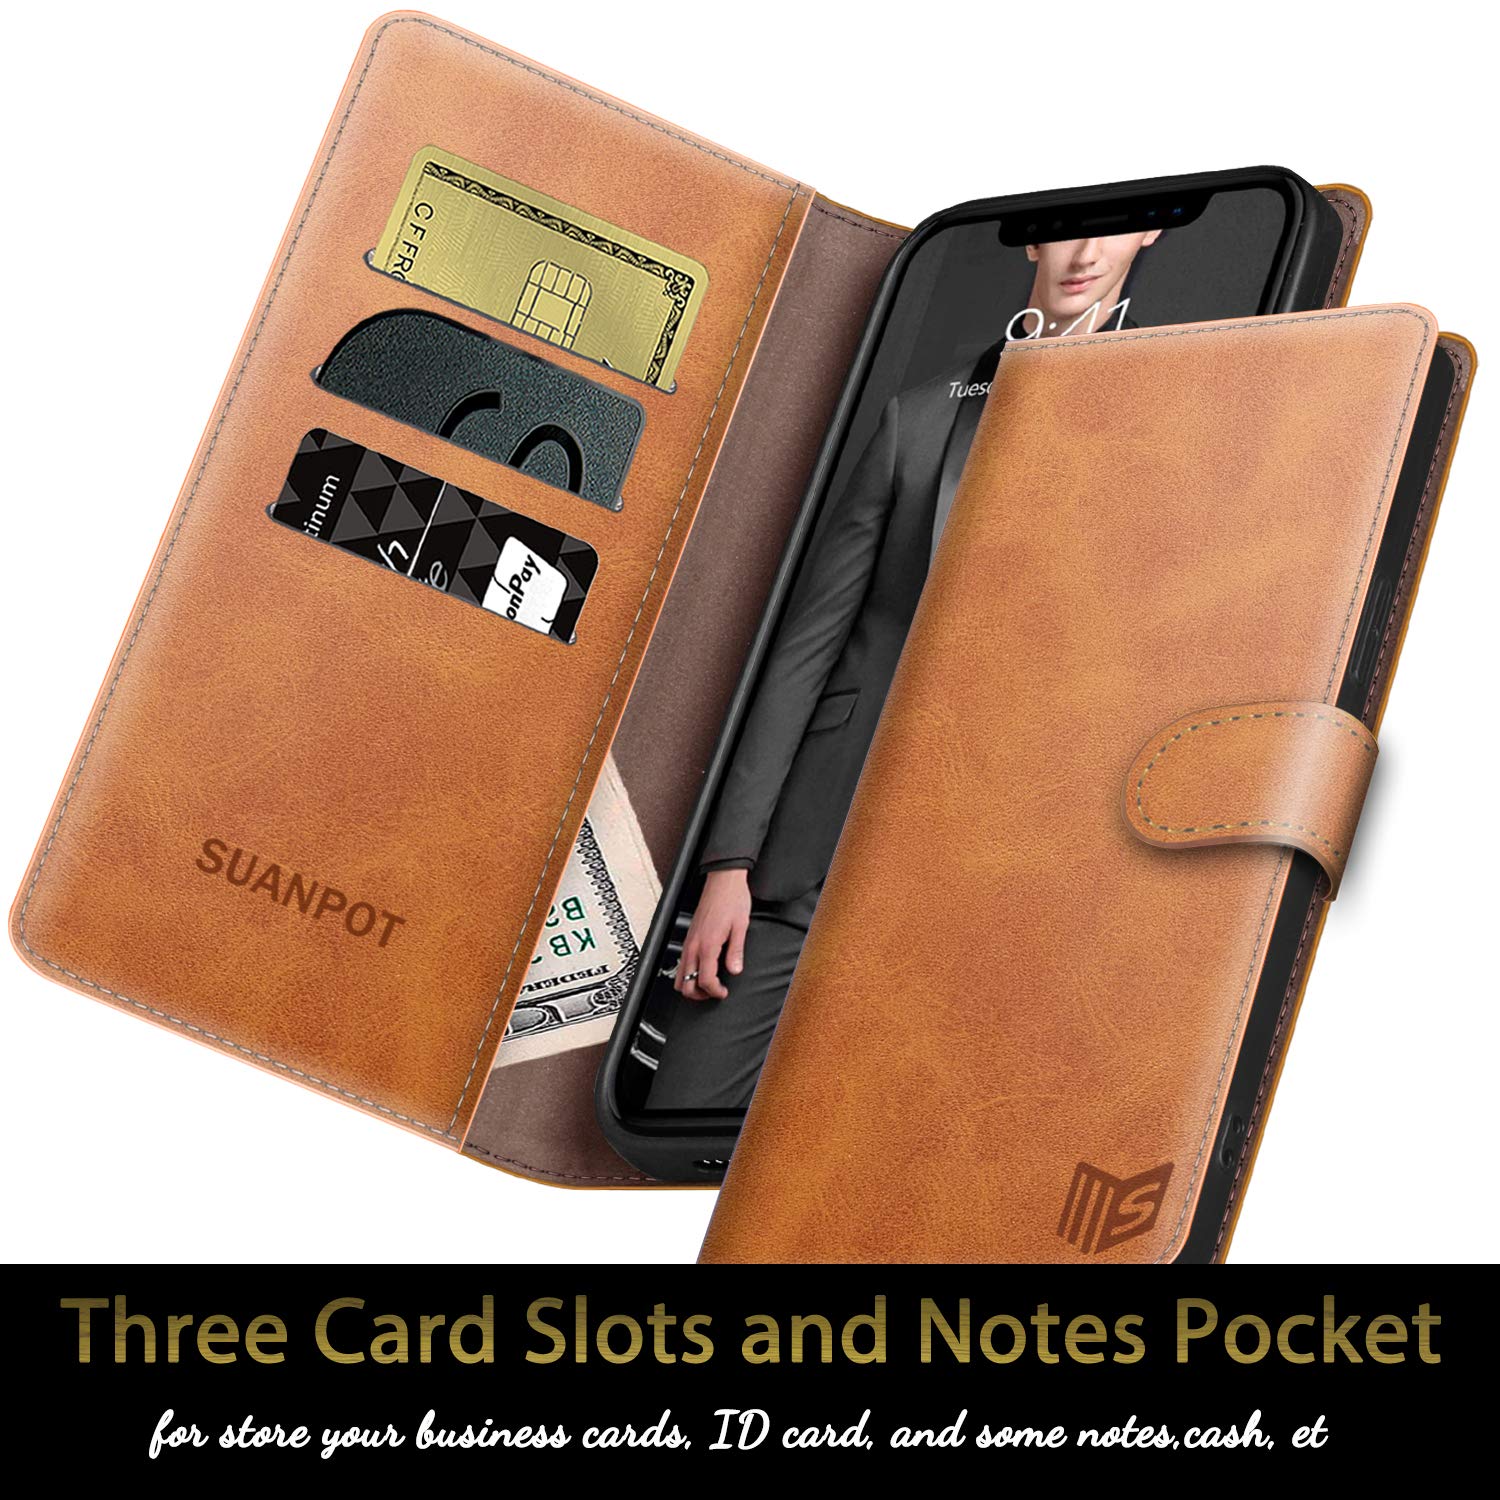 Great Choice Products For Samsung Galaxy S20 Ultra 6.9"(Non S20/S20+)Leather Wallet Case With Rfid Credit Card Holder Flip Folio Book Magnetic Cove…